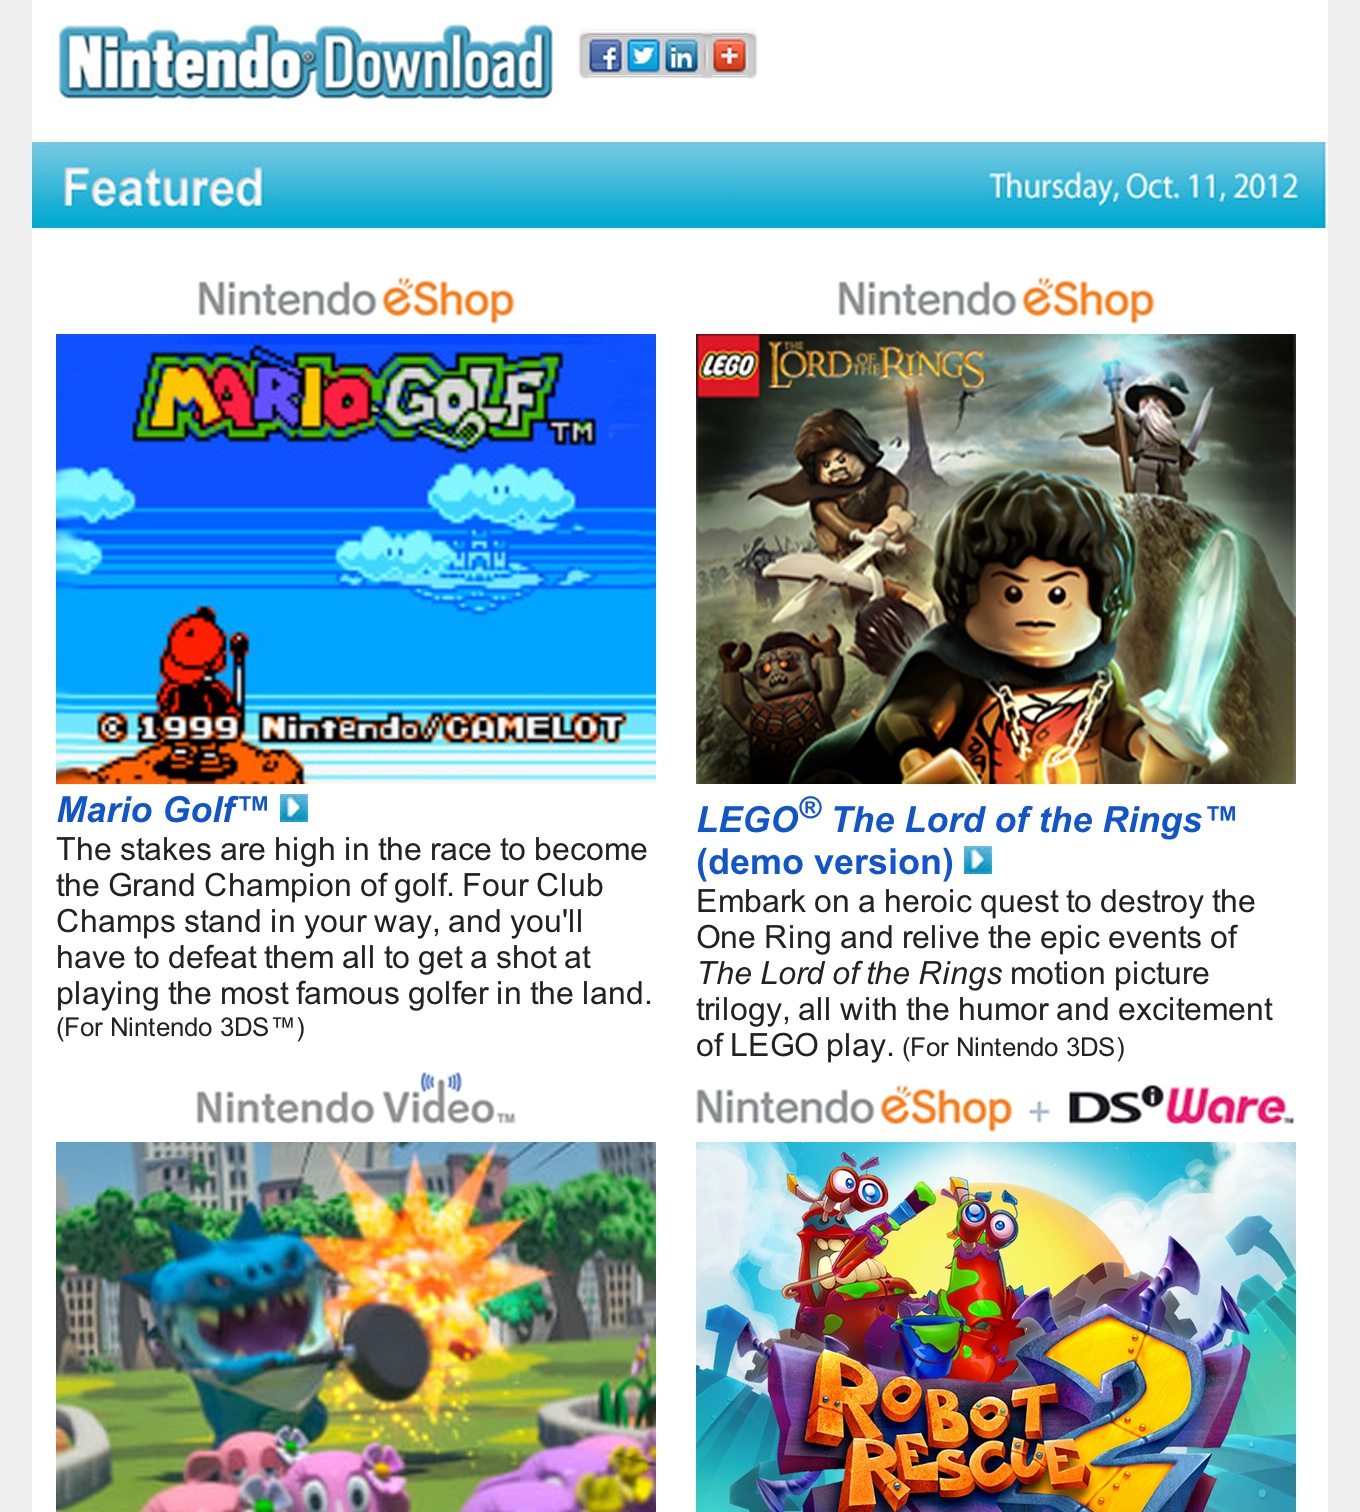 Nintendo Download – Oct. 11, 2012 – Mario Golf, Lego Lord of the Rings Demo